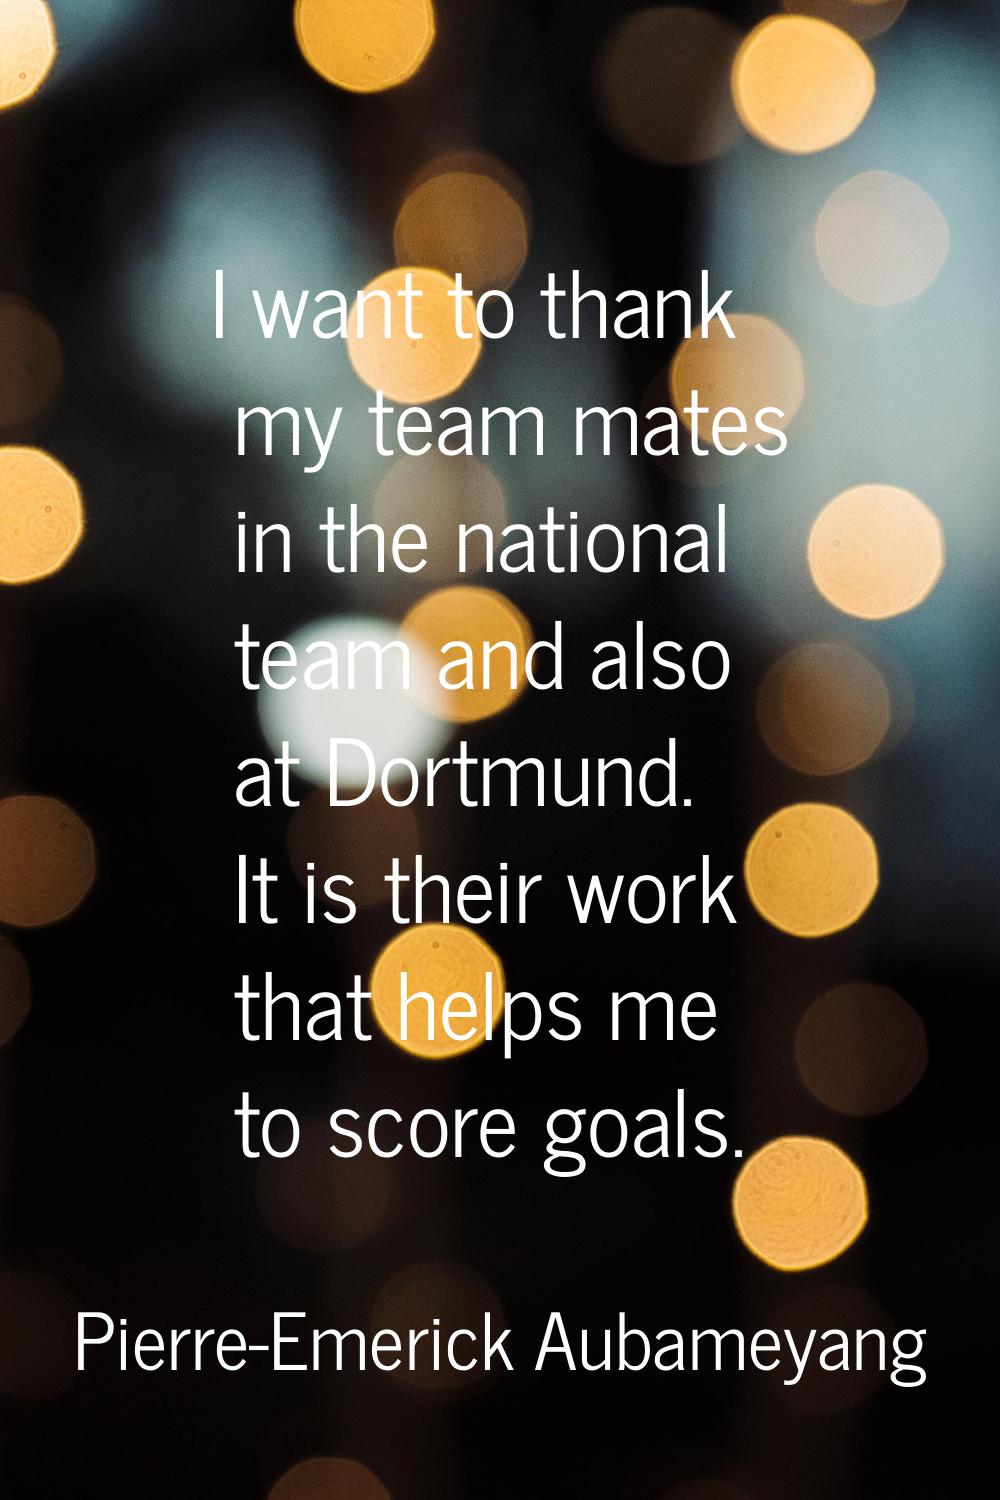 I want to thank my team mates in the national team and also at Dortmund. It is their work that help